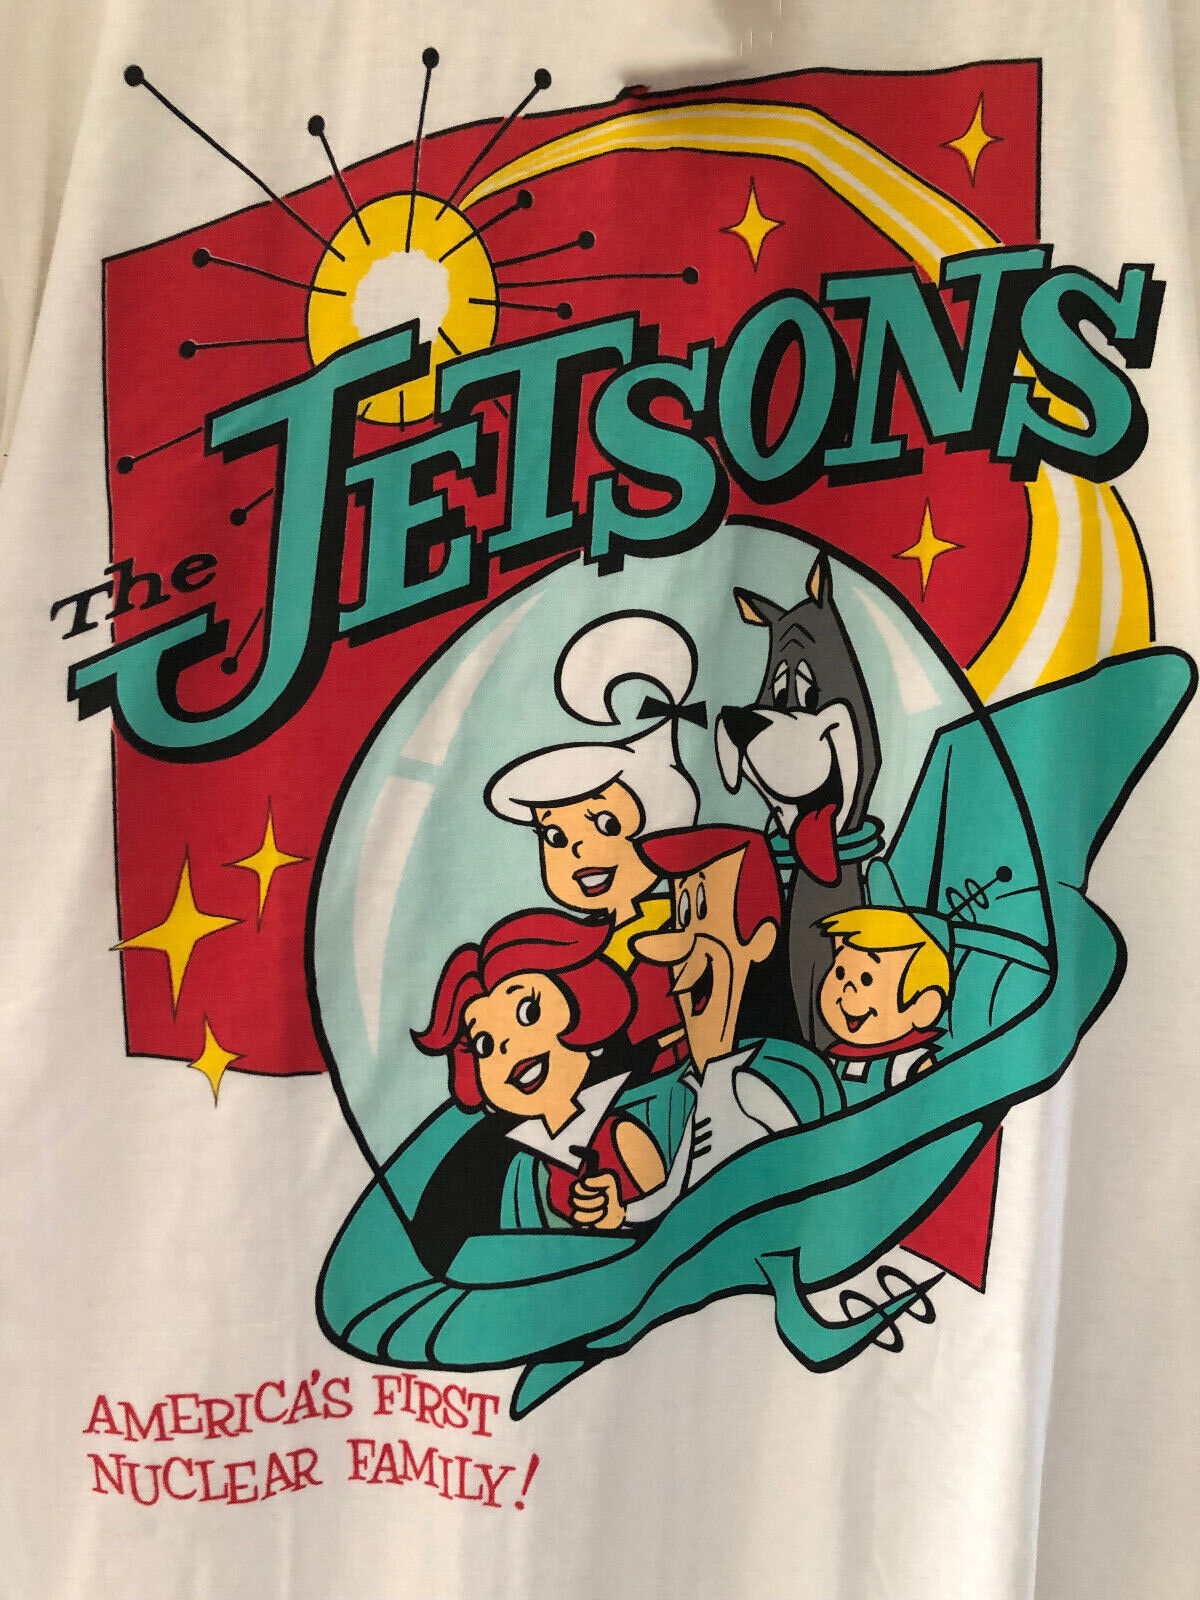 The JETSONS America\'s Frist Nuclear Family Shirt White Unisex S-5XL LE023